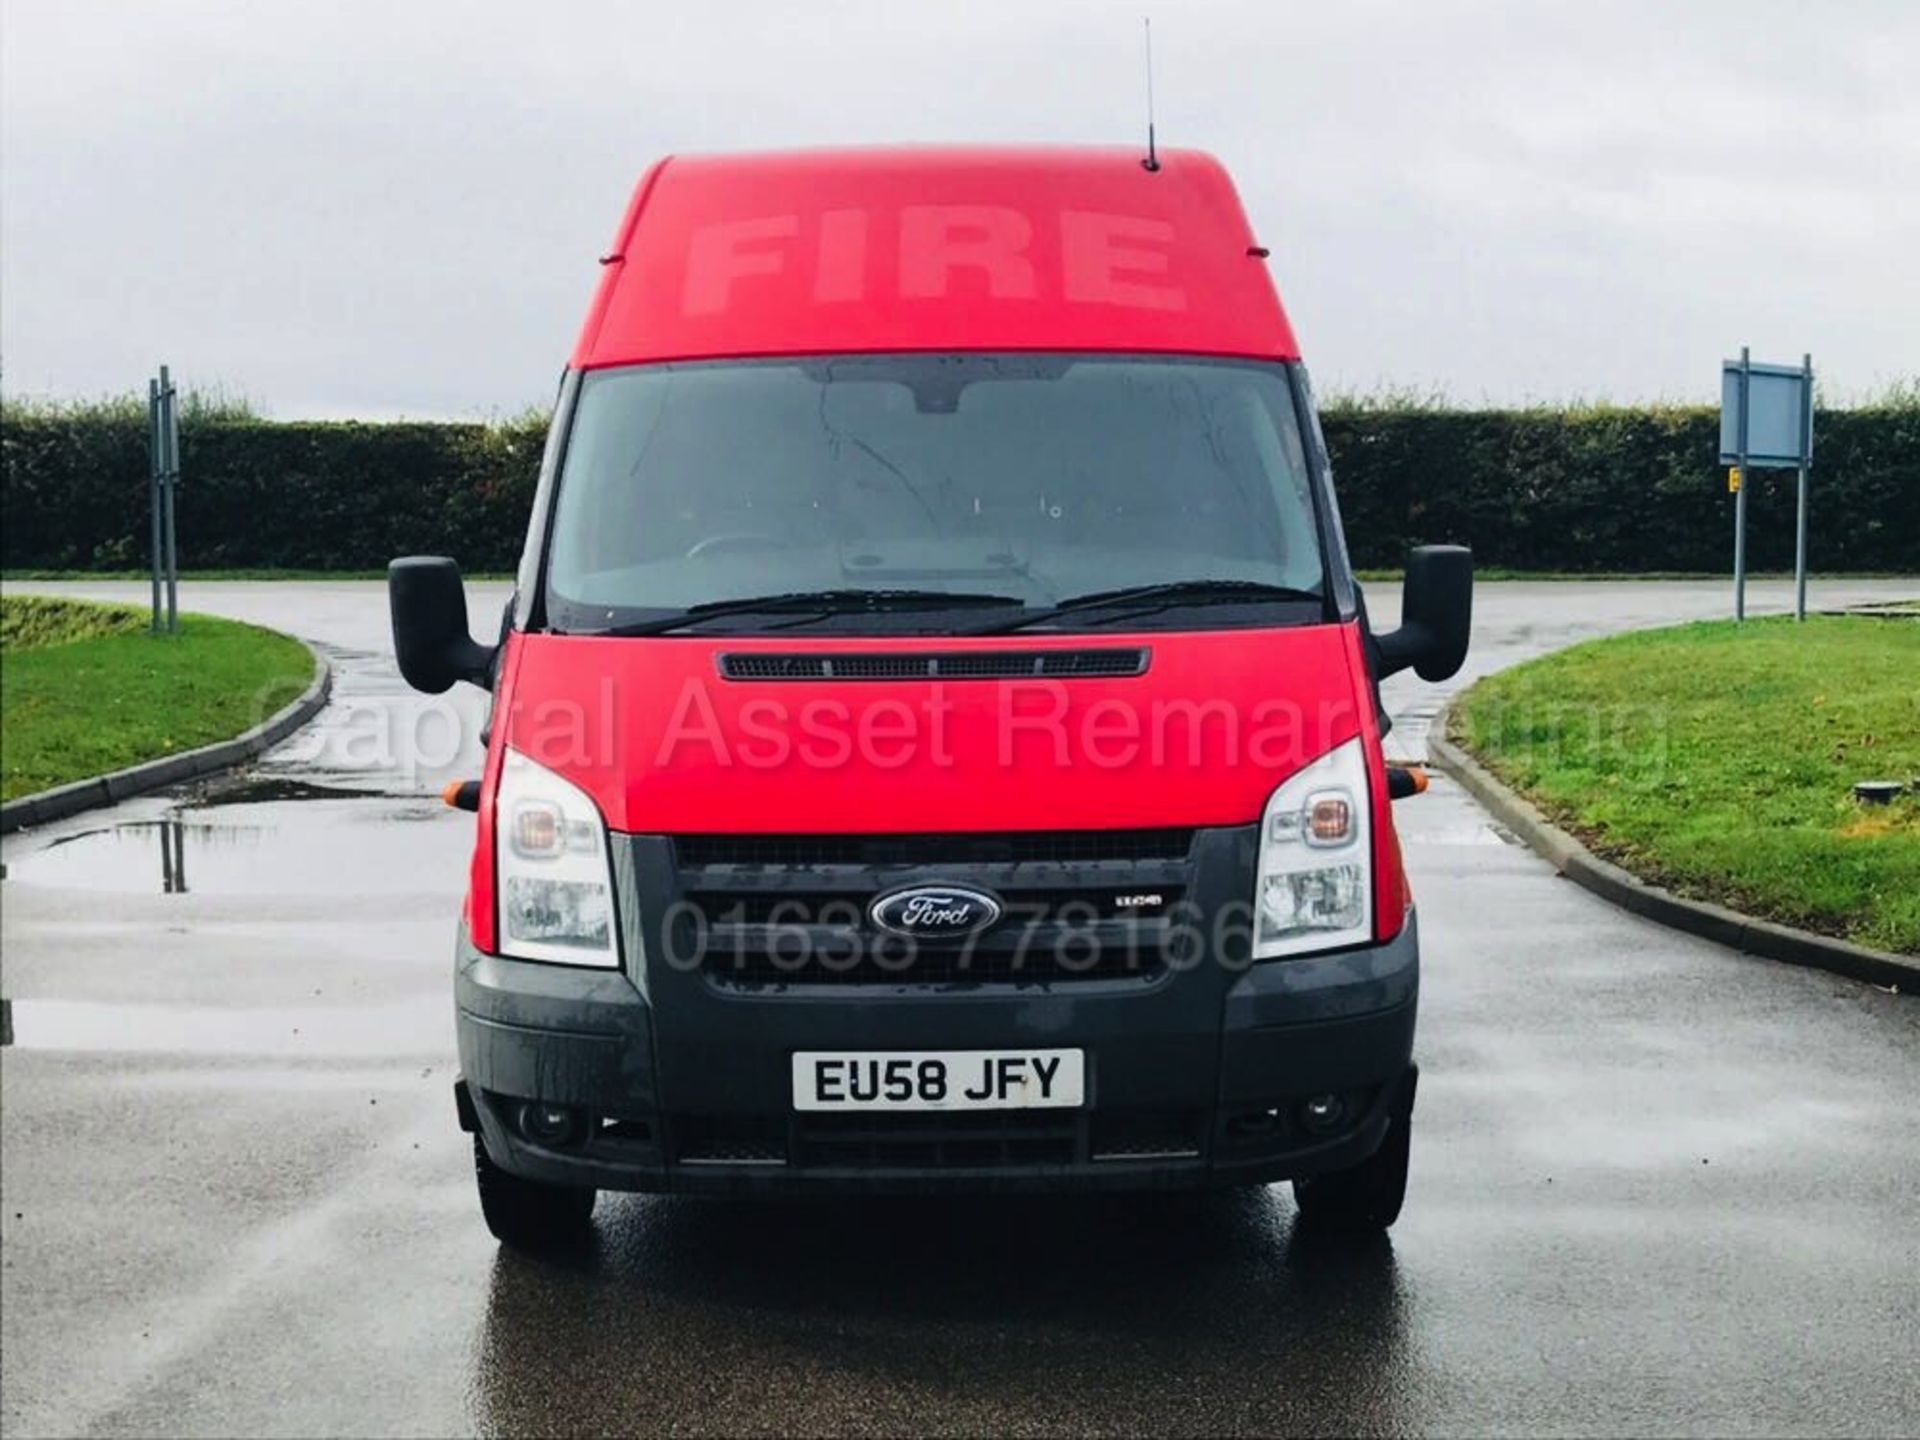 FORD TRANSIT T350L E/F 'XLWB HI-ROOF' (2009 MODEL) '2.4 TDCI - 115 PS - 6 SPEED' **AIR CON** - Image 9 of 30